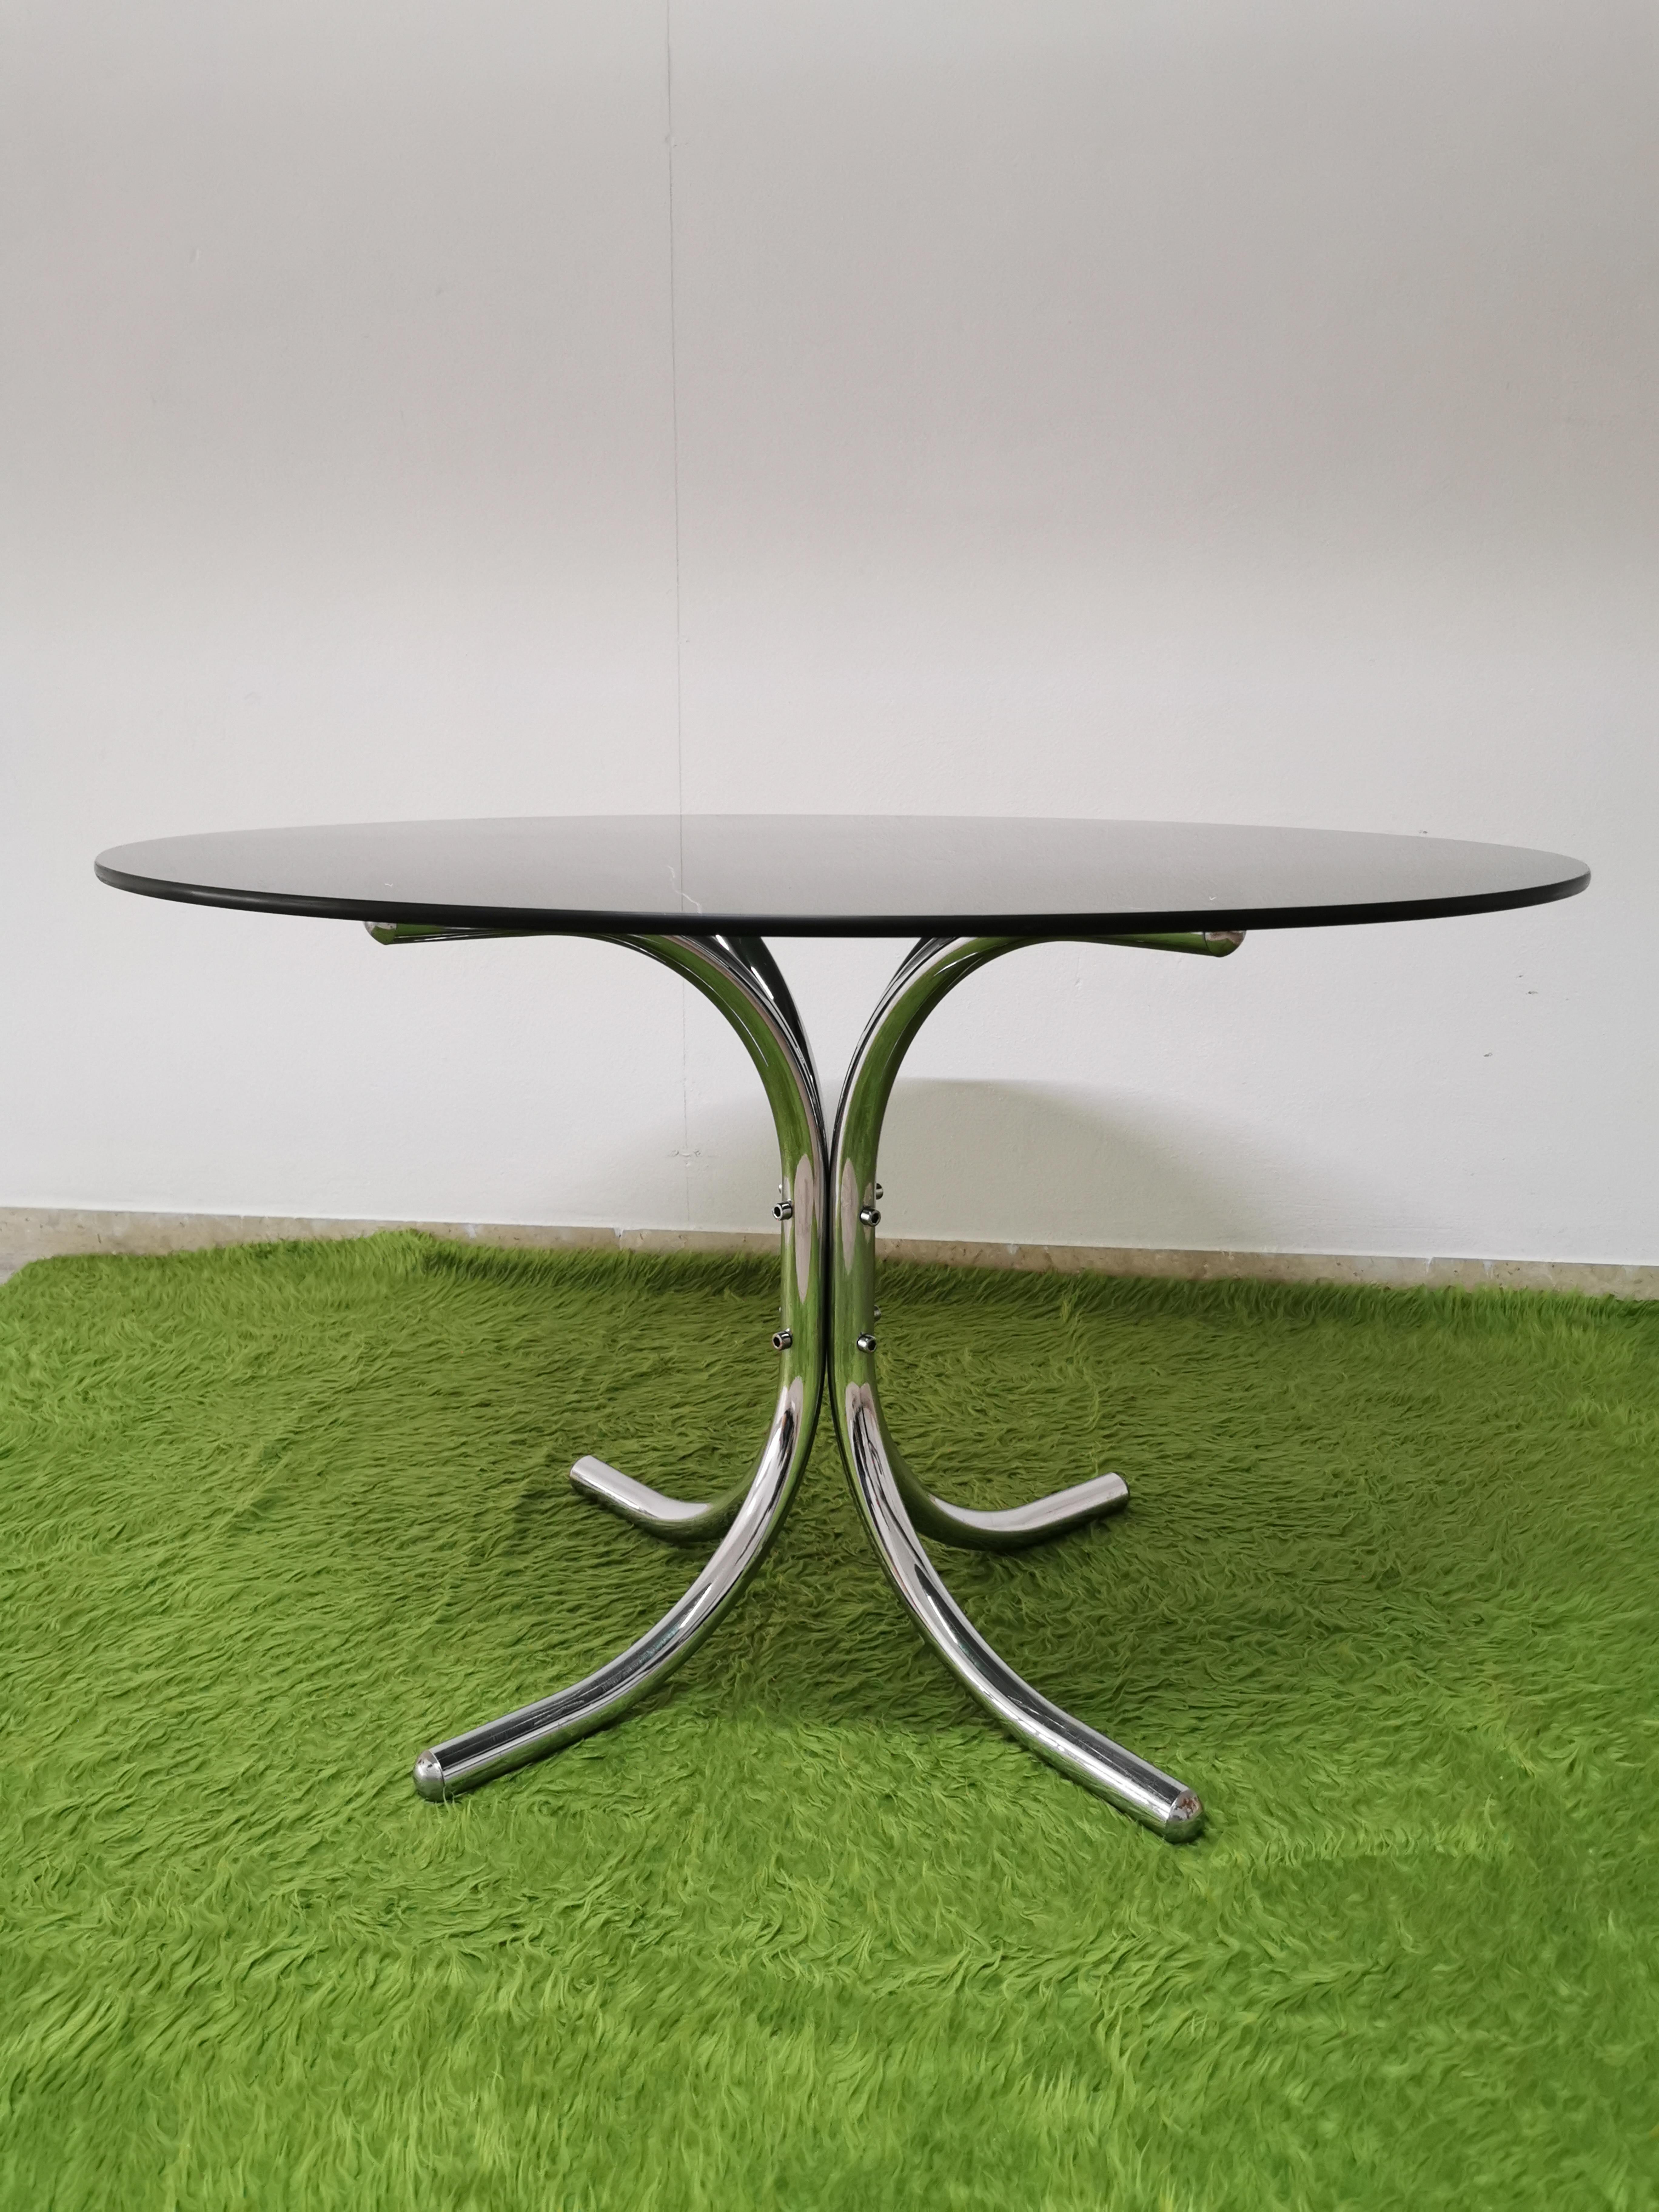 Elegant dining table attributed to Giotto Stoppino with round smoked glass top and tubular chromed metal foot. Italian production of the 1970s.